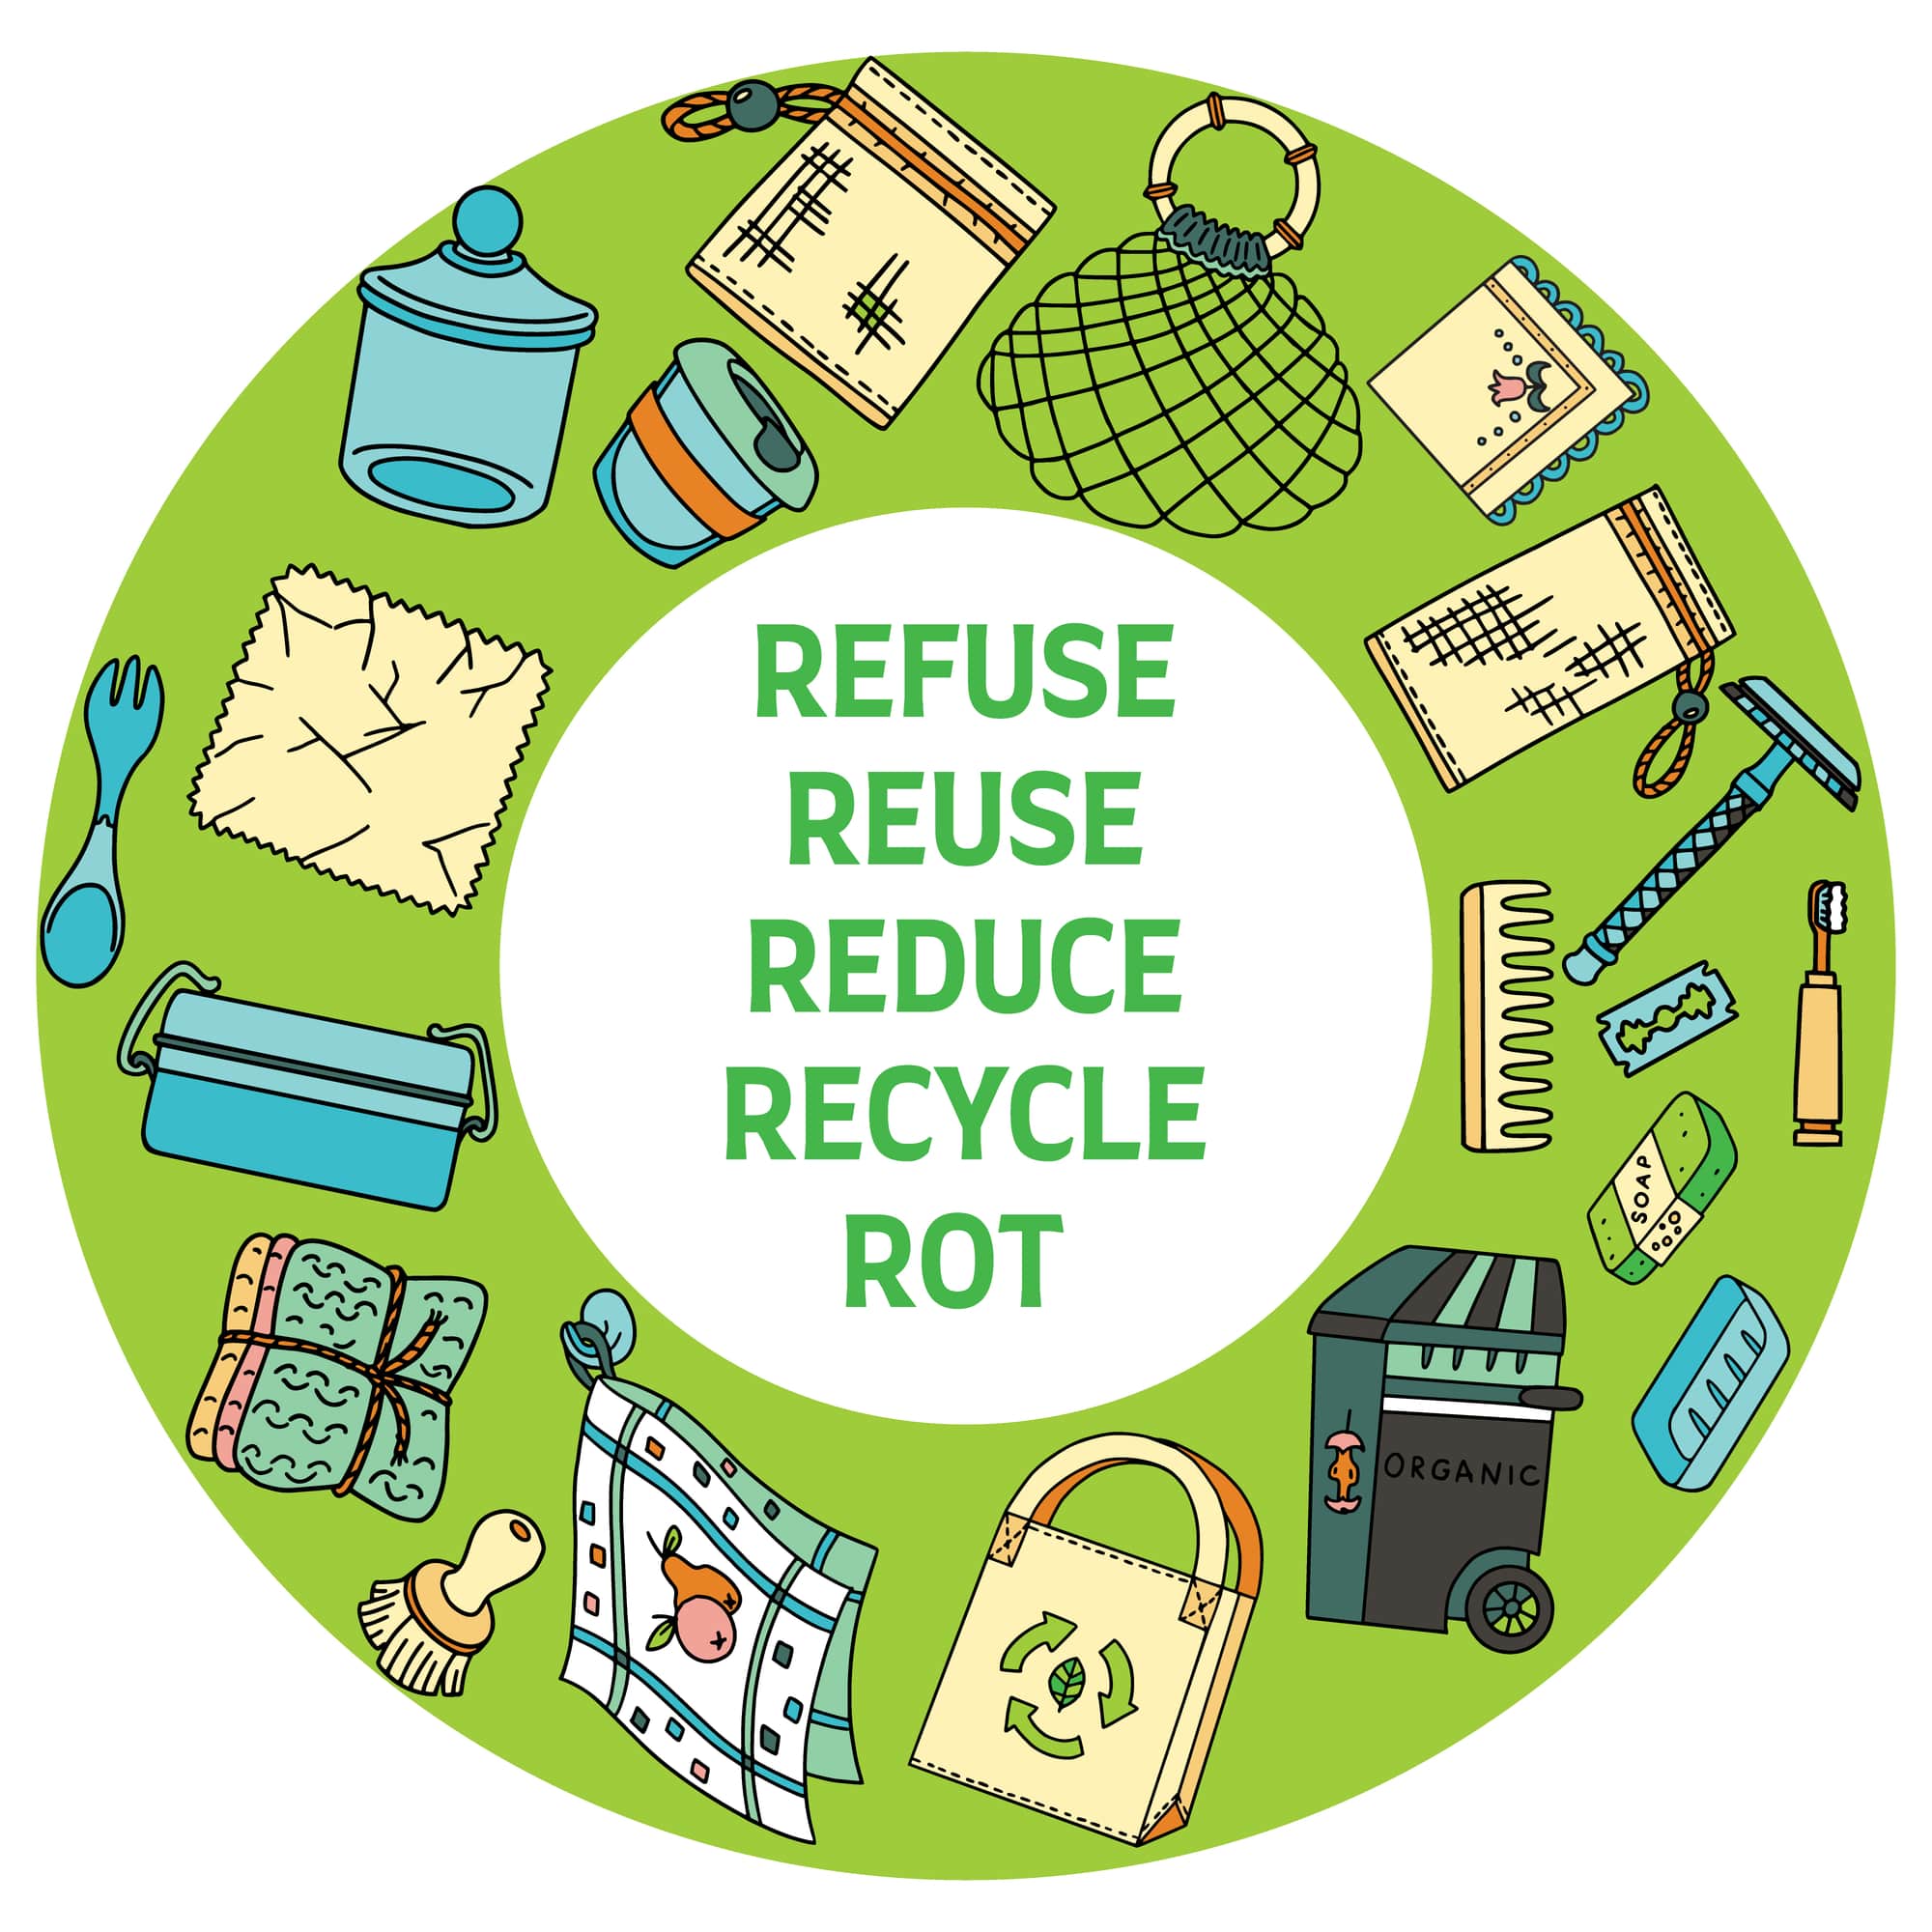 “Refuse” as one of the principles of eco-living